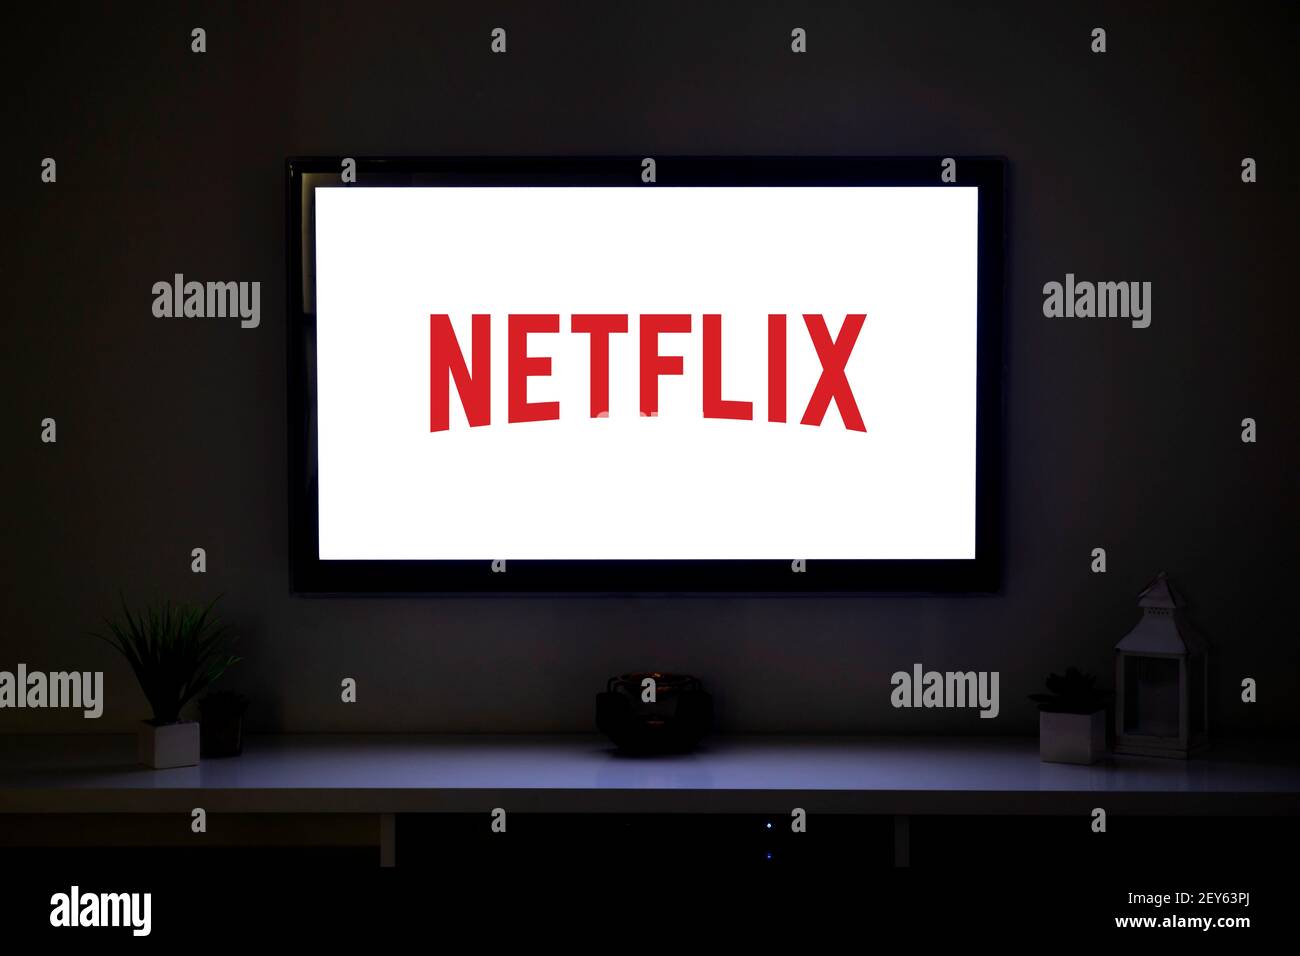 ROSARIO, ARGENTINA - MARCH 4, 2021: Netflix logo on the screen of LCD Smart TV in the middle of a living room of a family home. Stock Photo